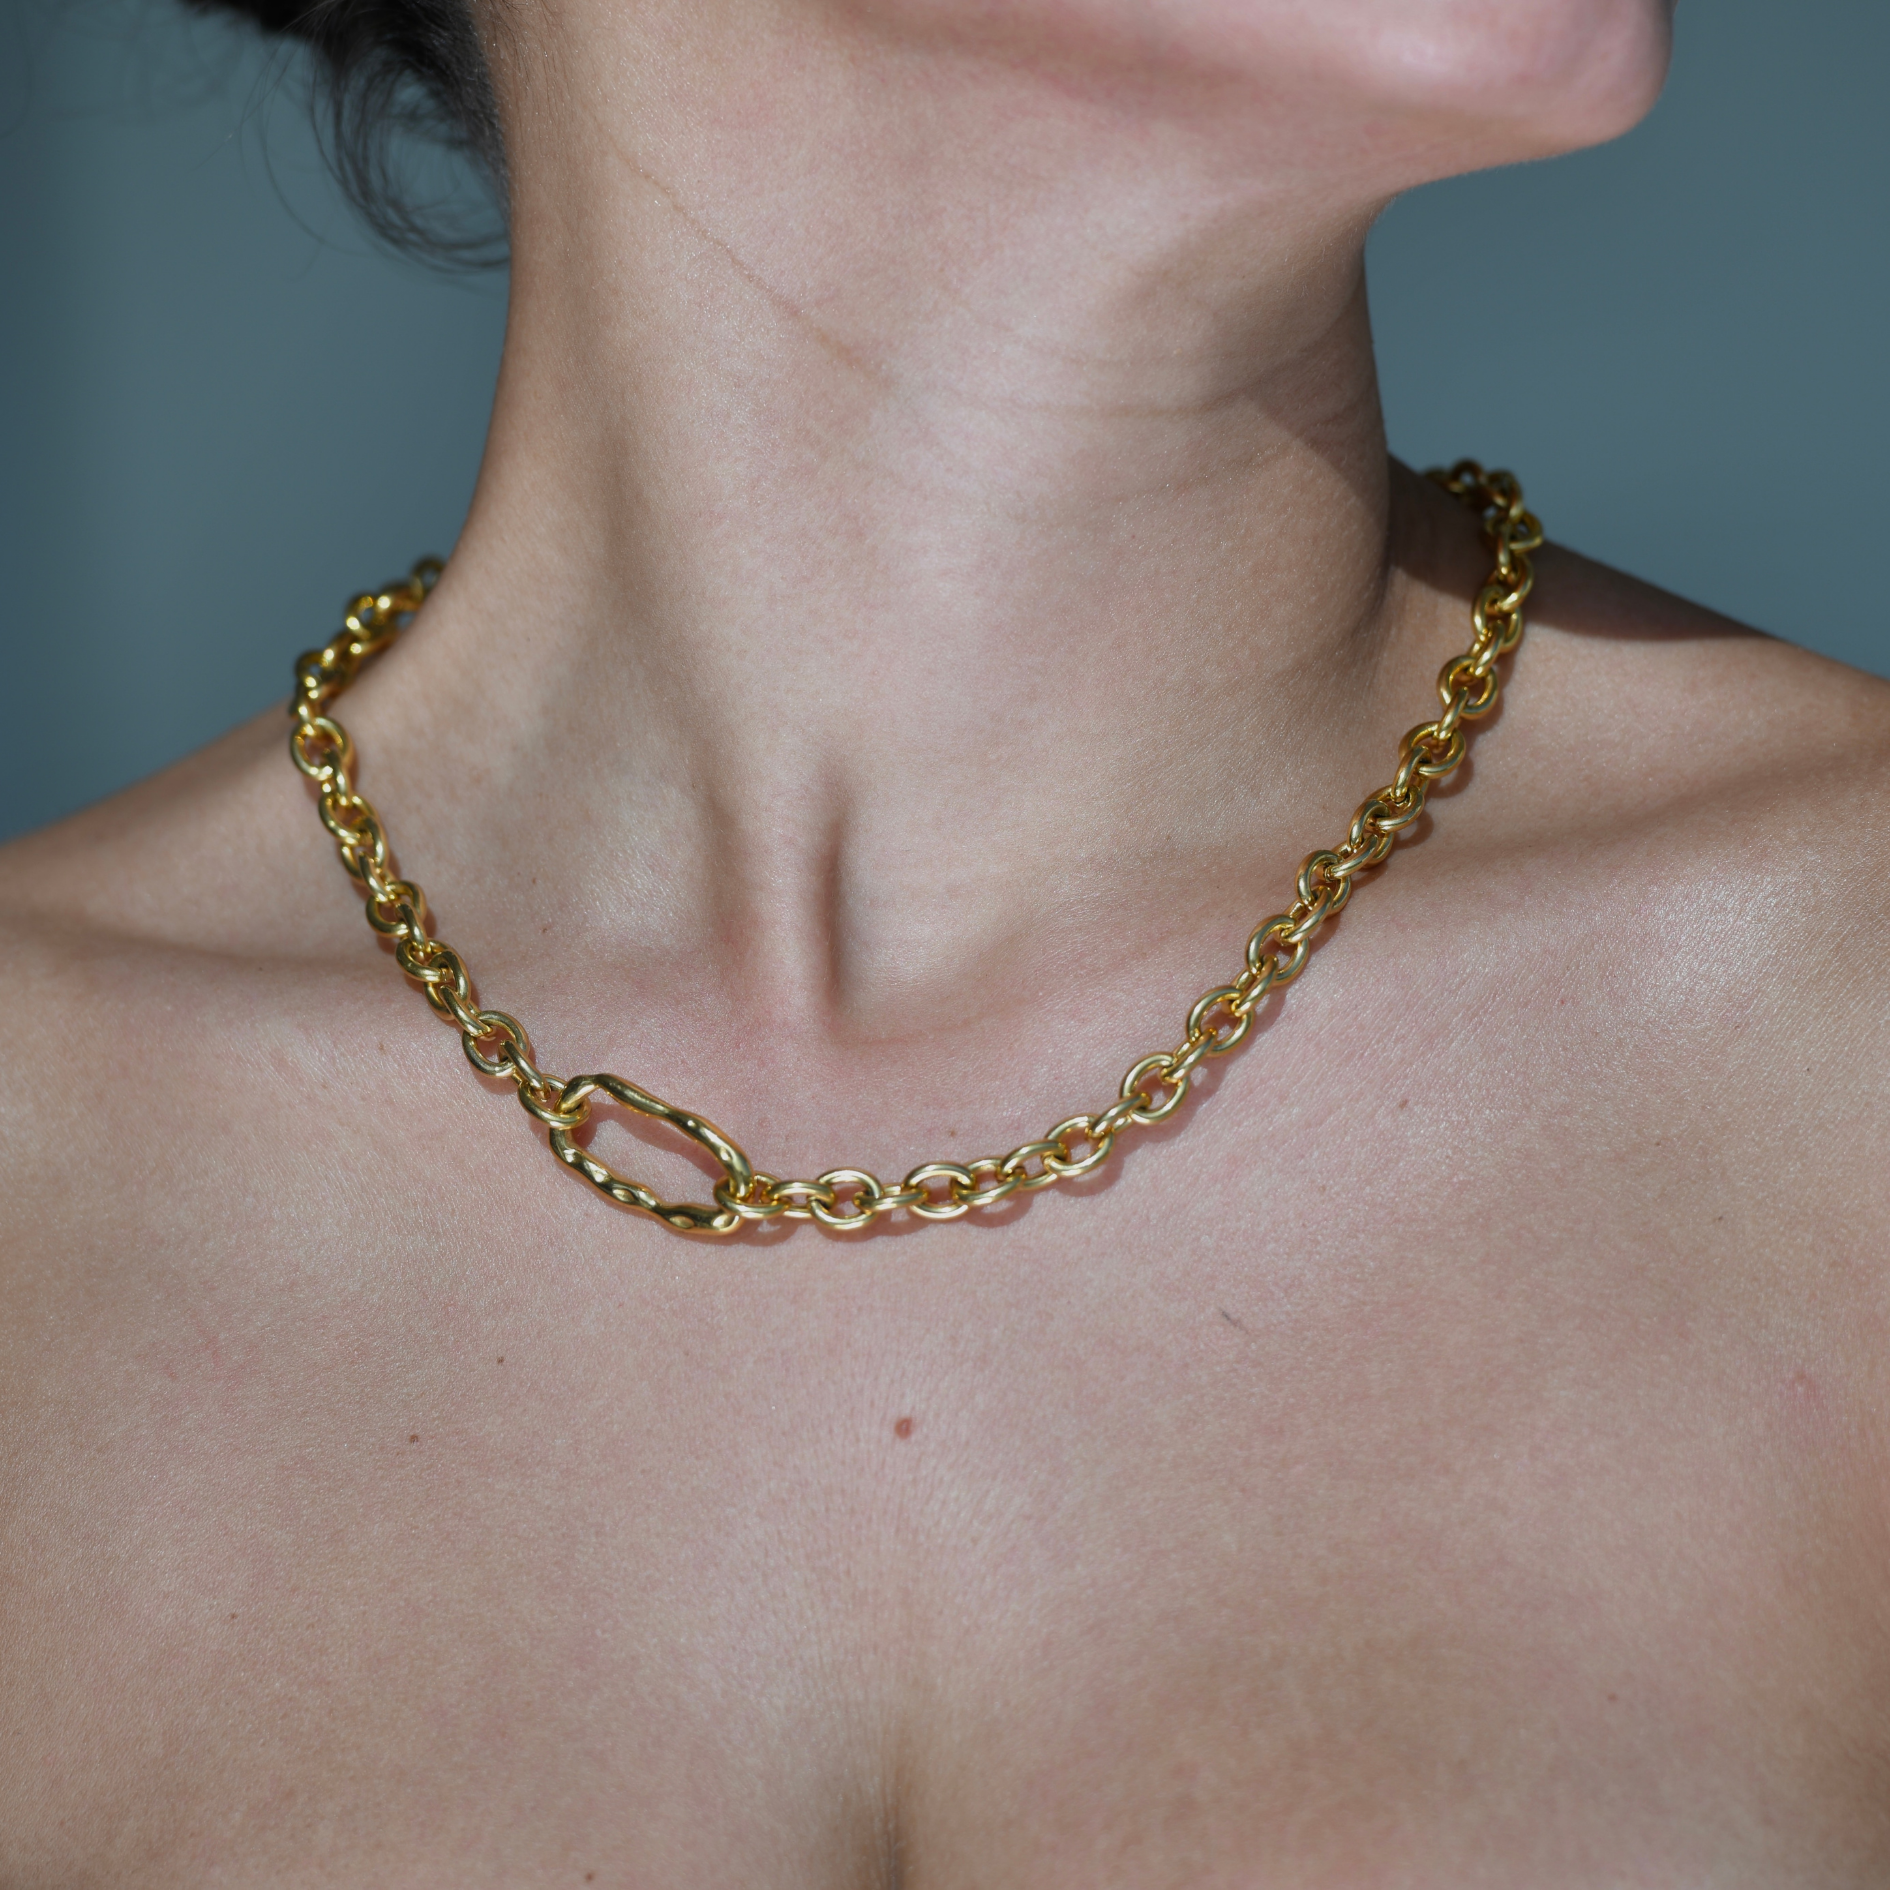  Bold Gold Chain with an irregular horizontal oval charm in the side of the chain. DUNE Gold Chain Necklace